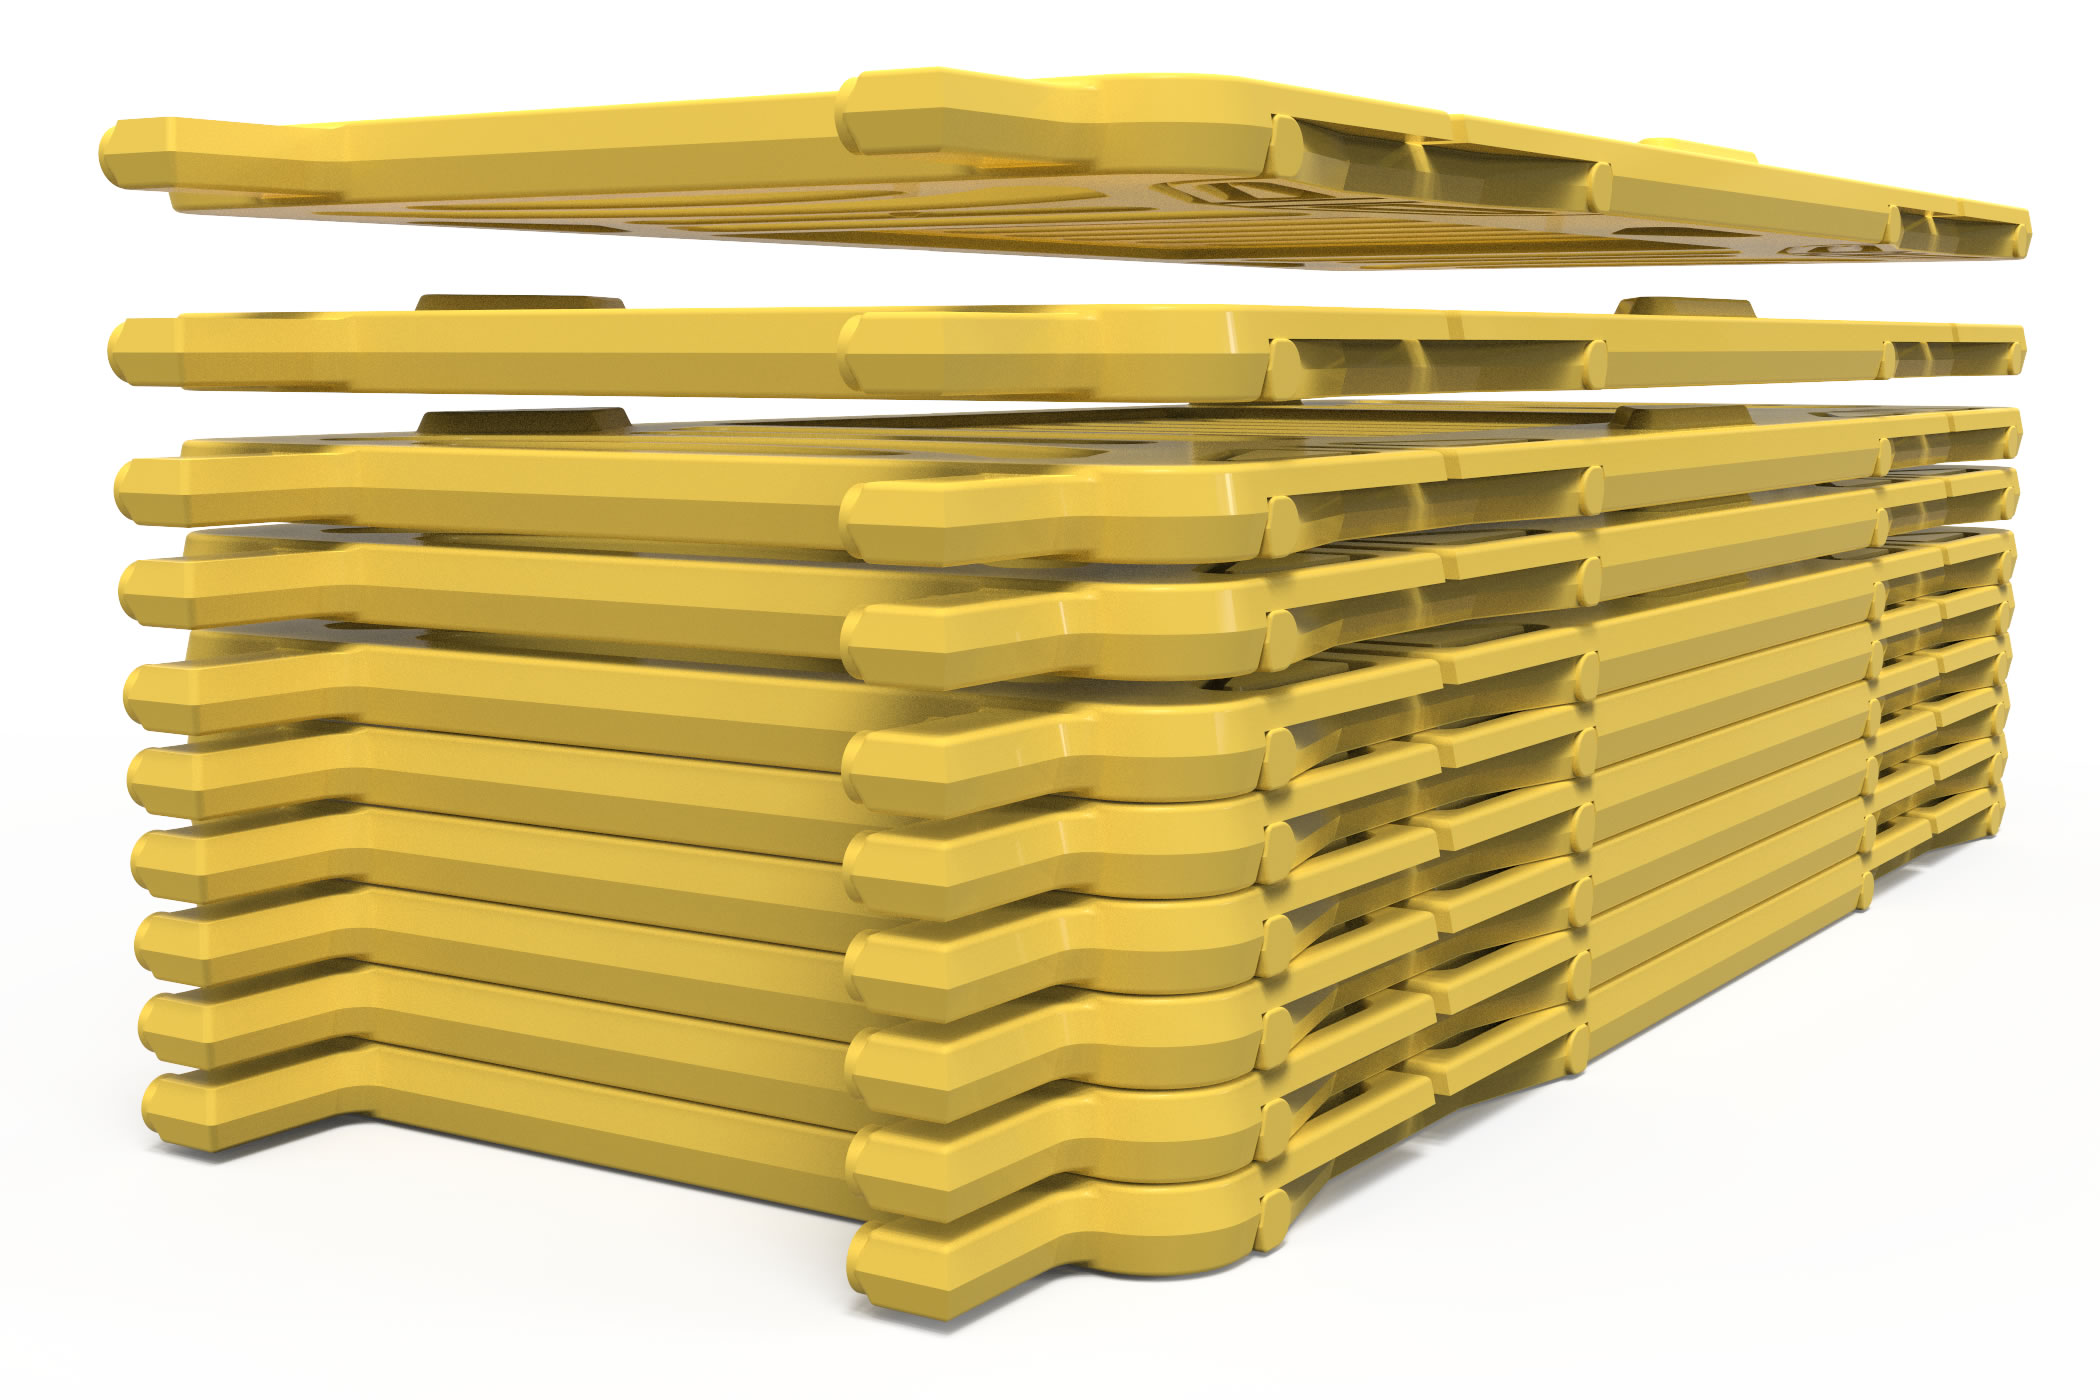 Stacking Crowd Control Barriers on a pallet